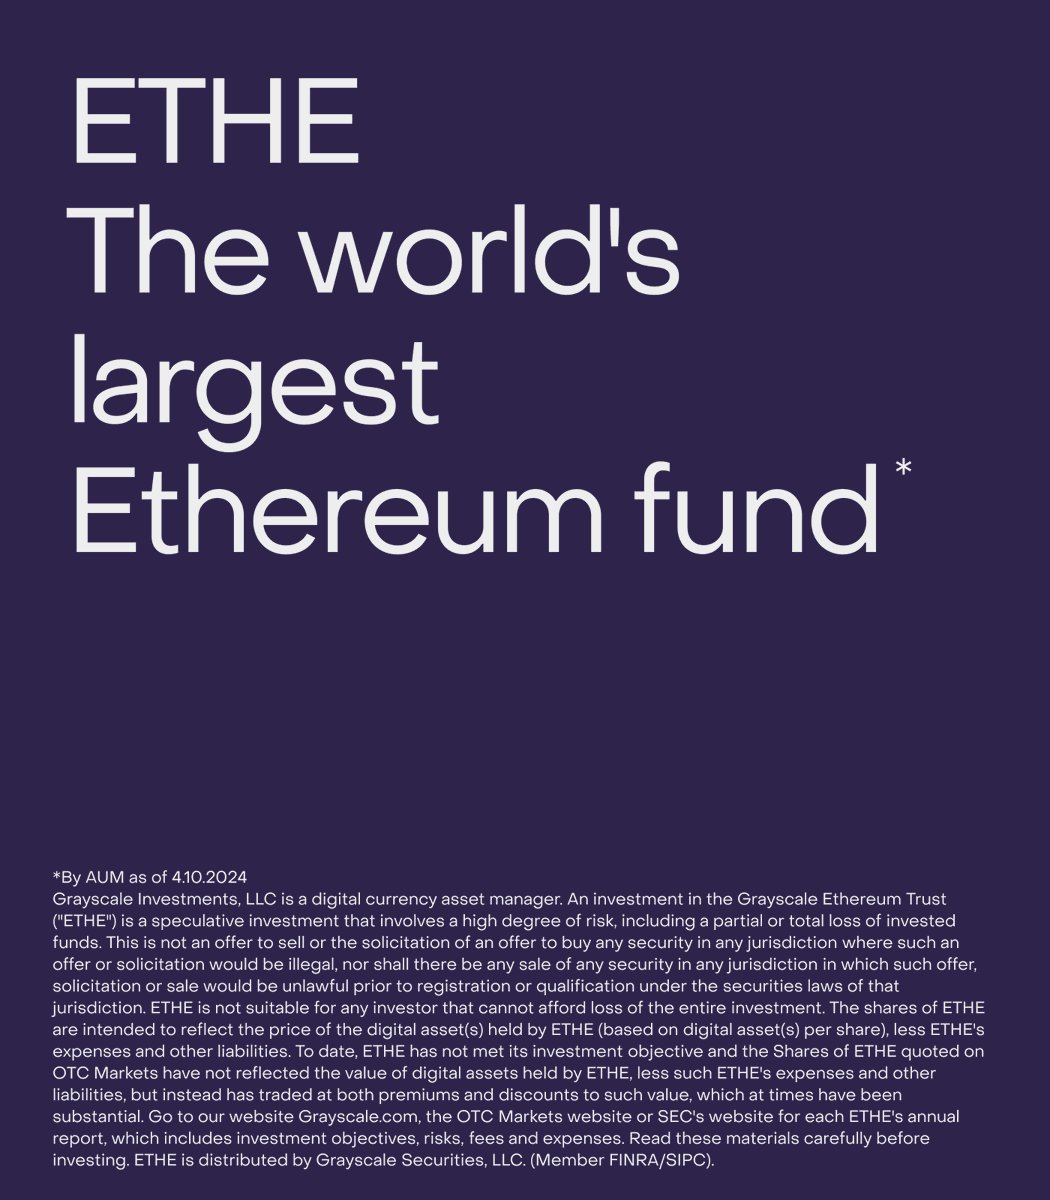 Grayscale #Ethereum Trust is the world’s largest investment vehicle by AUM for Ethereum, as of 4/10/2024. Learn more about $ETHE and important disclosures: grayscale.com/crypto-product…